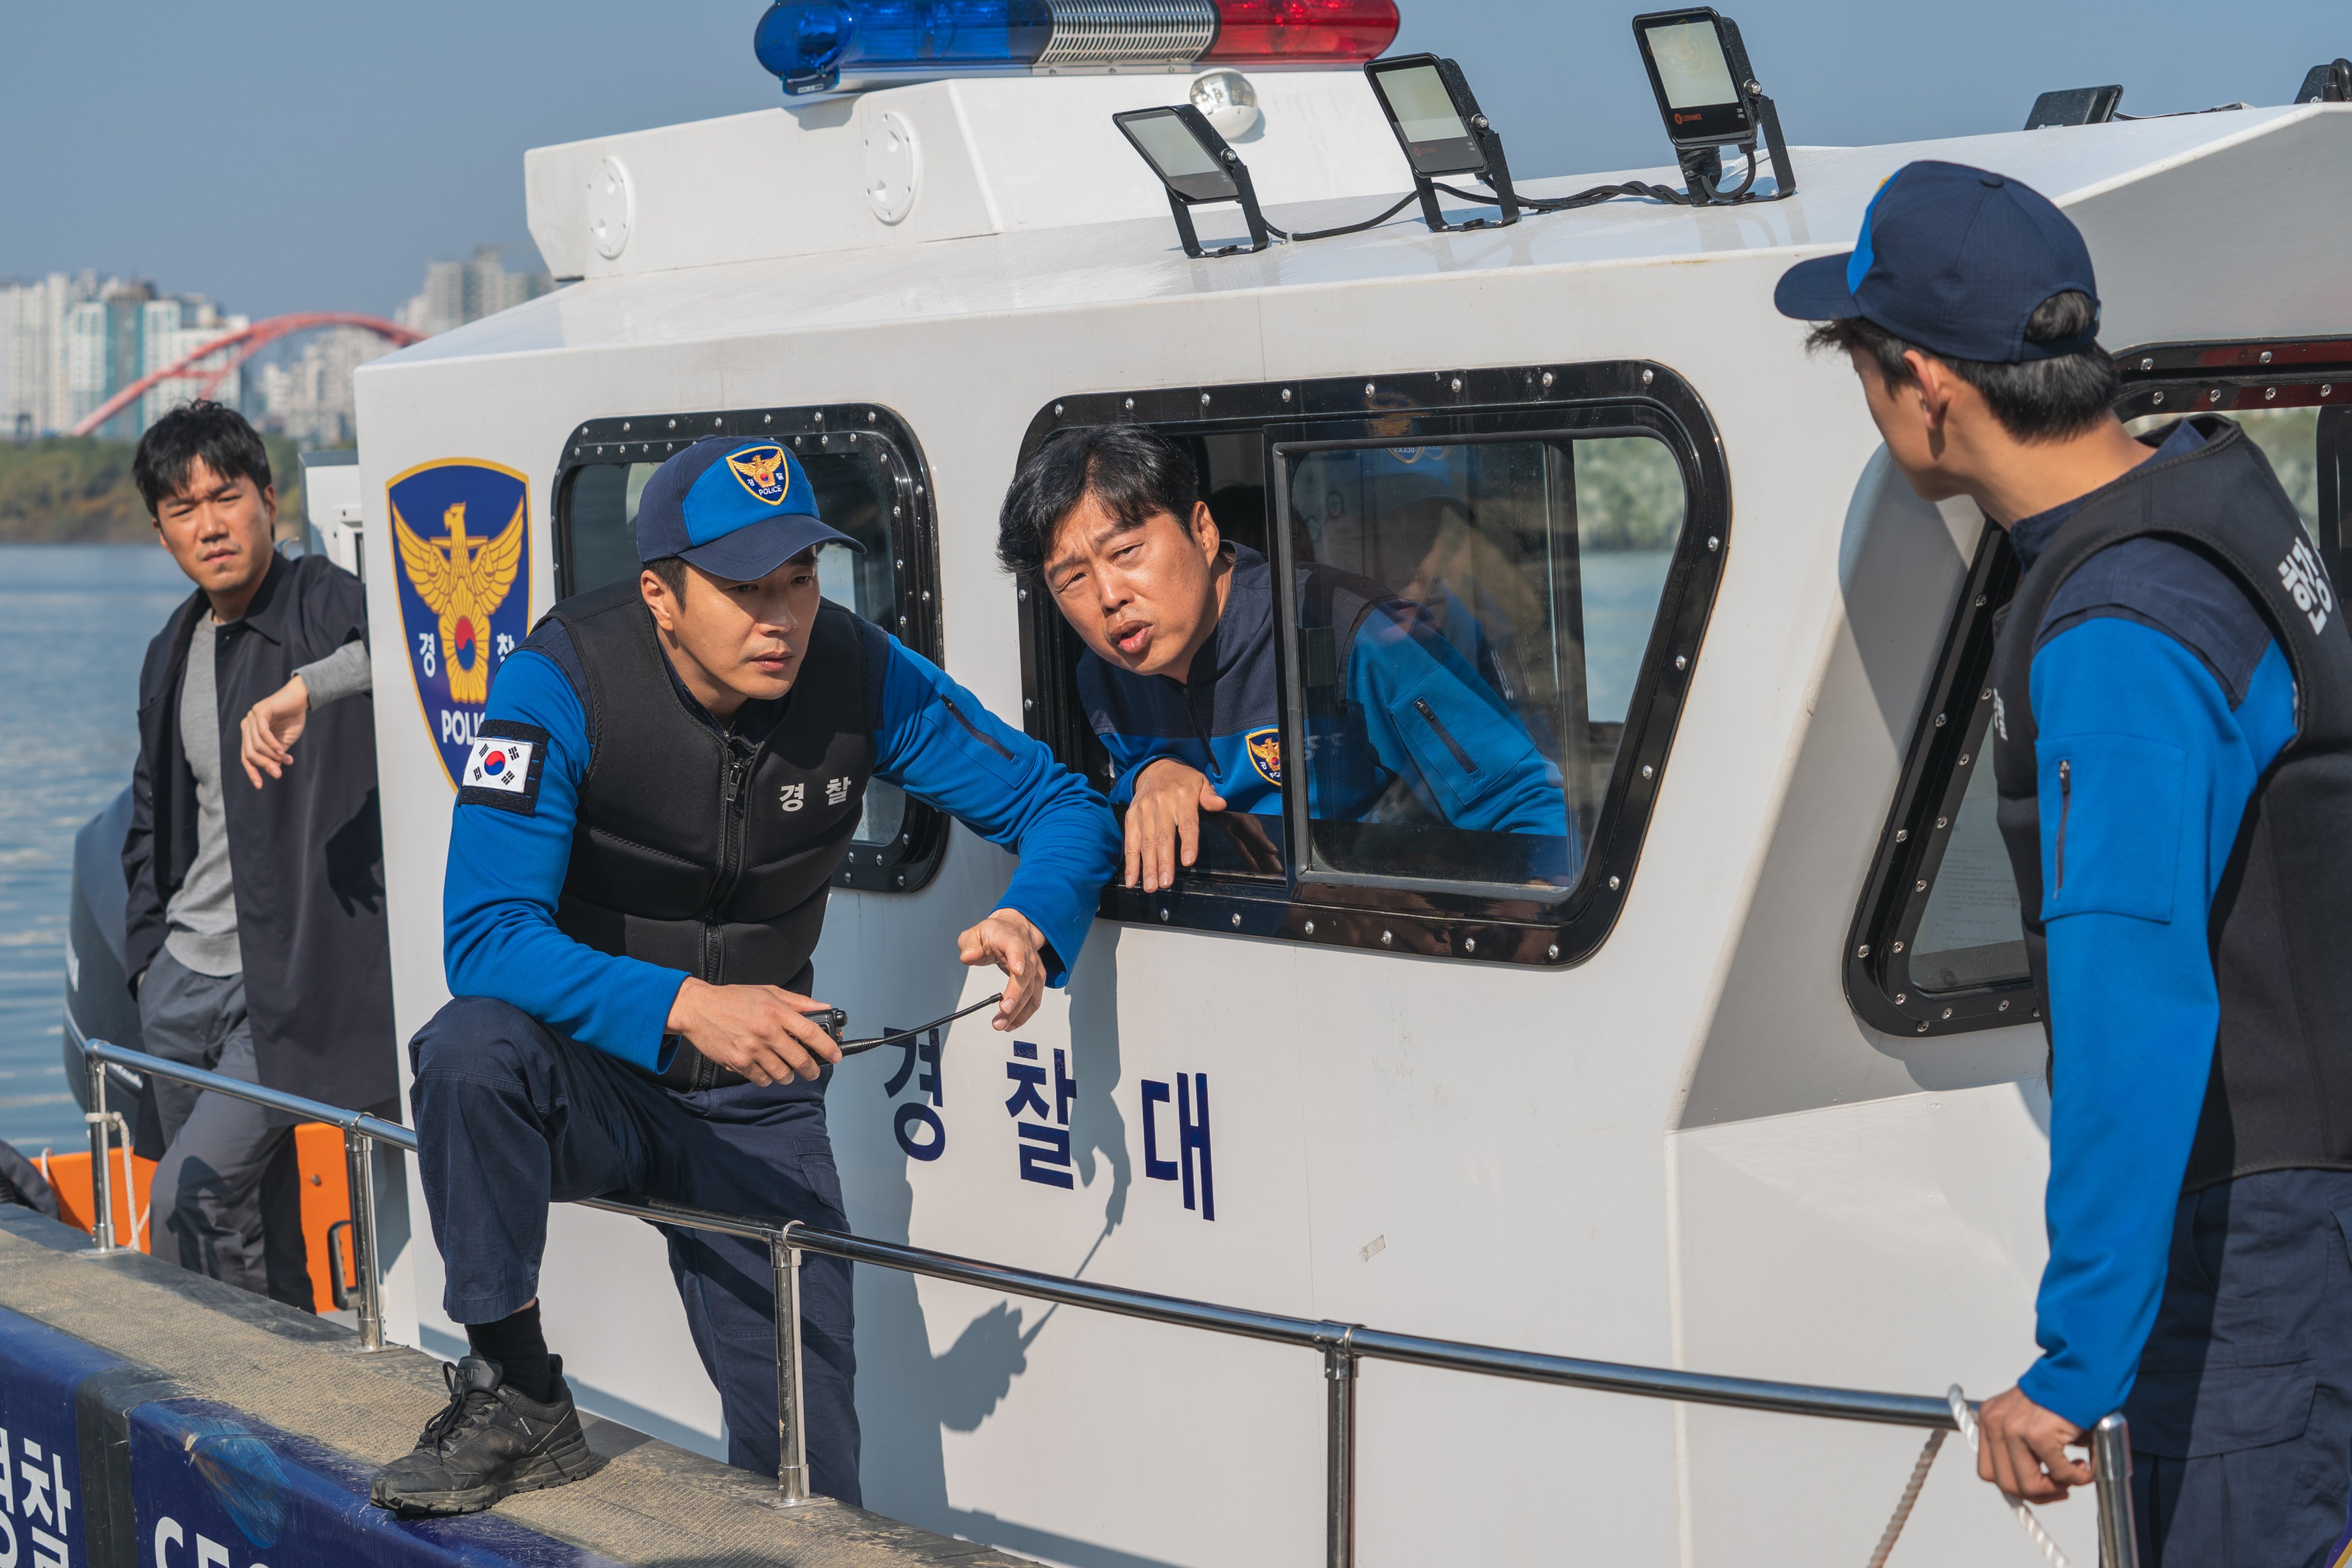 Kwon Sang-woo (left) as river policeman Han Du-jin and Kim Hee-won as fellow officer Lee Cheon-seok in a still from “Han River Police” on Disney+. Photo: Disney+